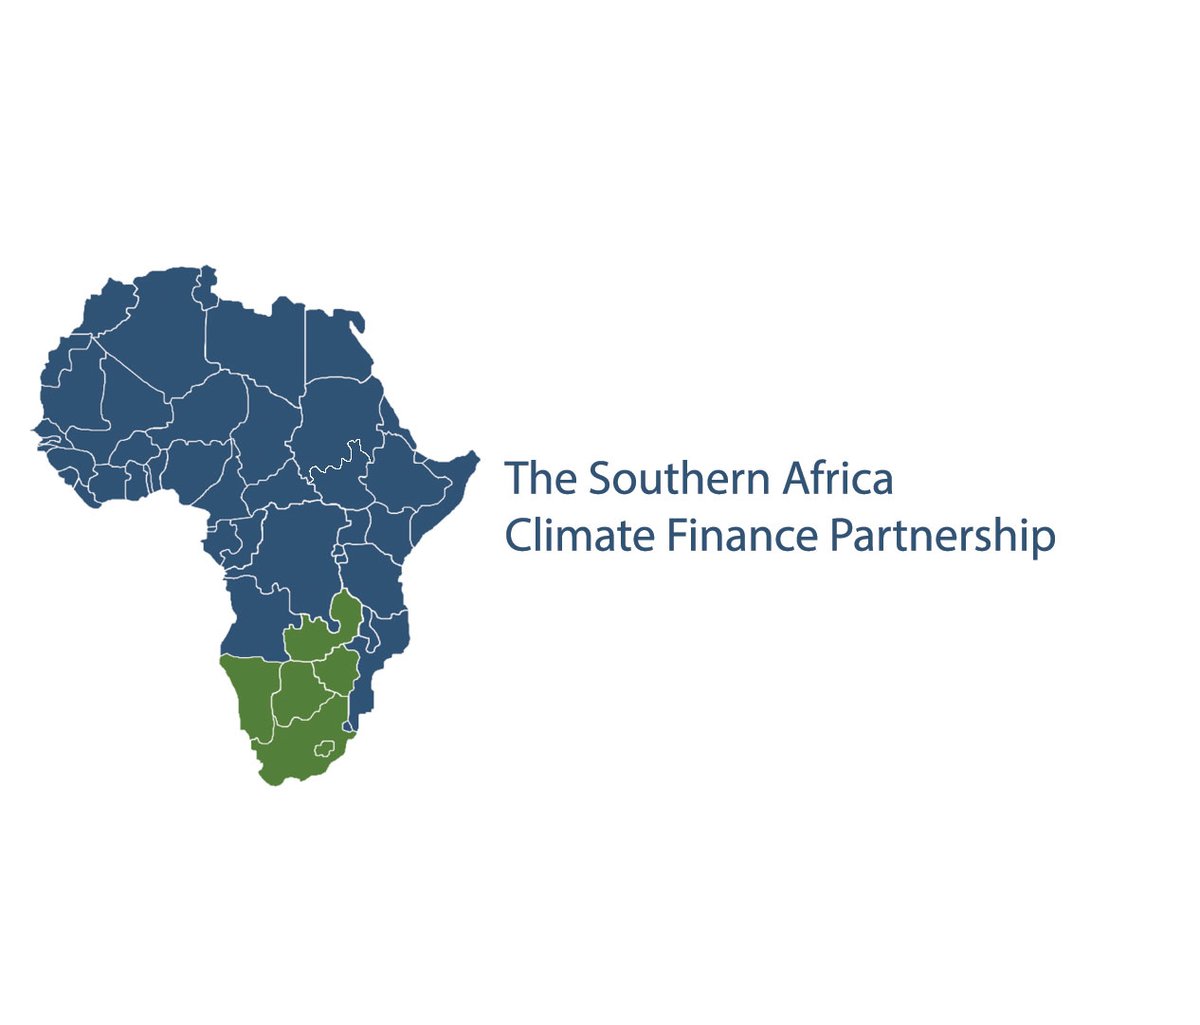 Job Opportunity: Research Analyst for the Southern Africa Climate Finance Partnership For more information, visit: bit.ly/2MV3Gpl Closing date: 1 March 2021 #ClimateFinance #ClimateResilience #JobOpportunity #Job #career #greenjobs @cc_idrc @IDRC_CRDI